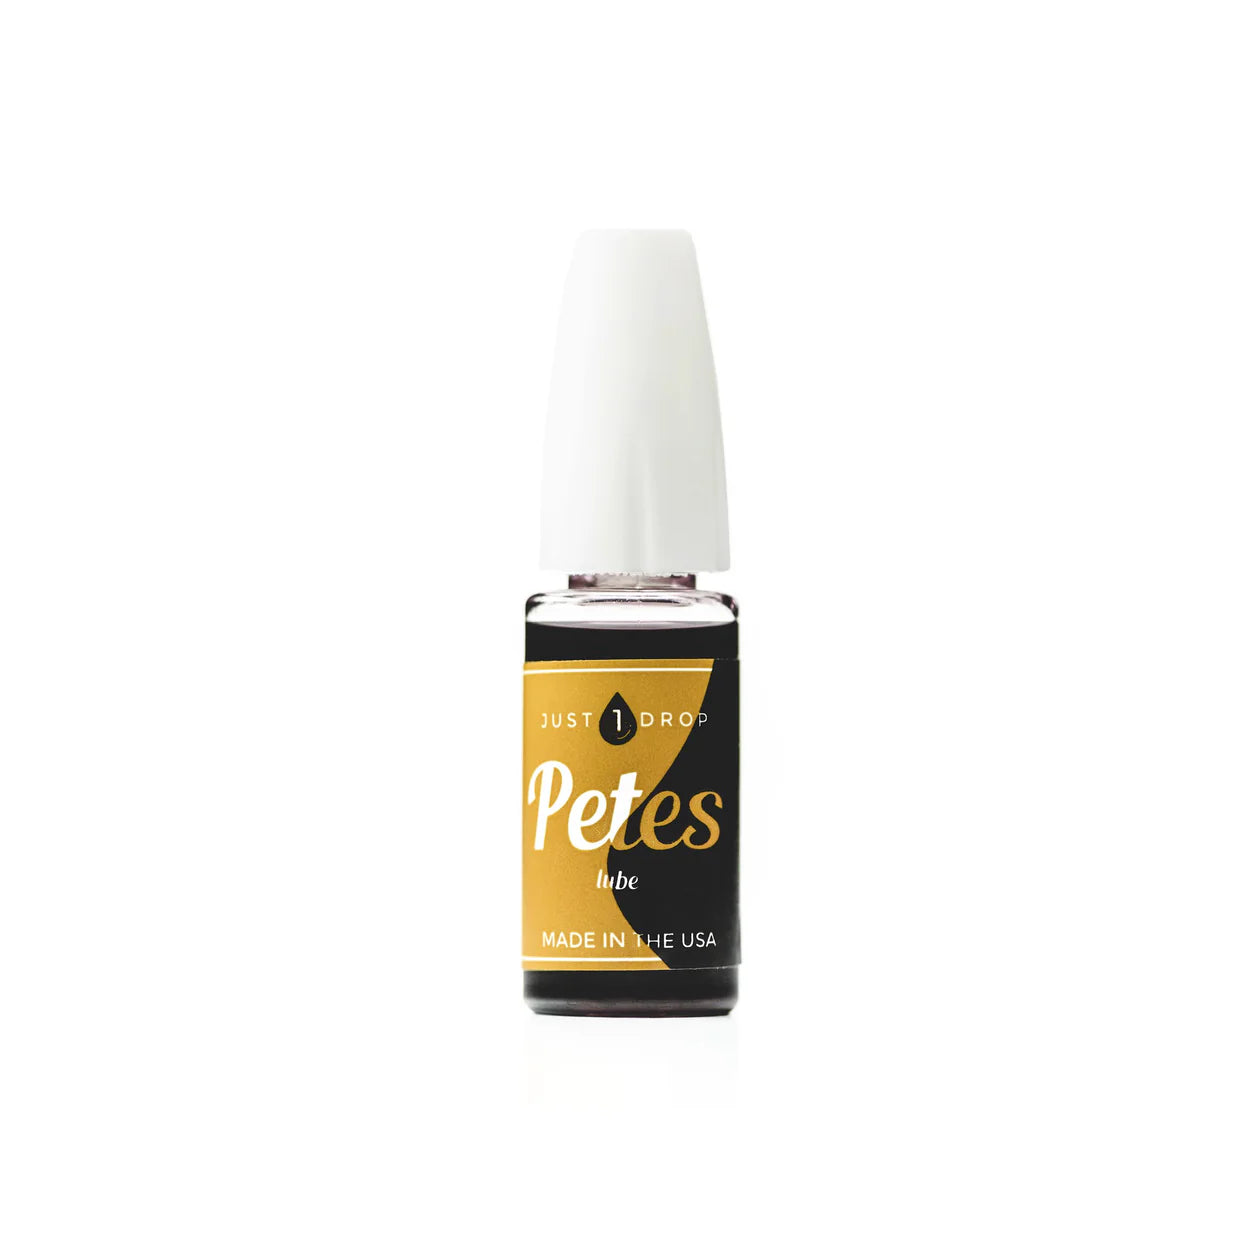 WESN Petes Lube Pocket Knife Oil